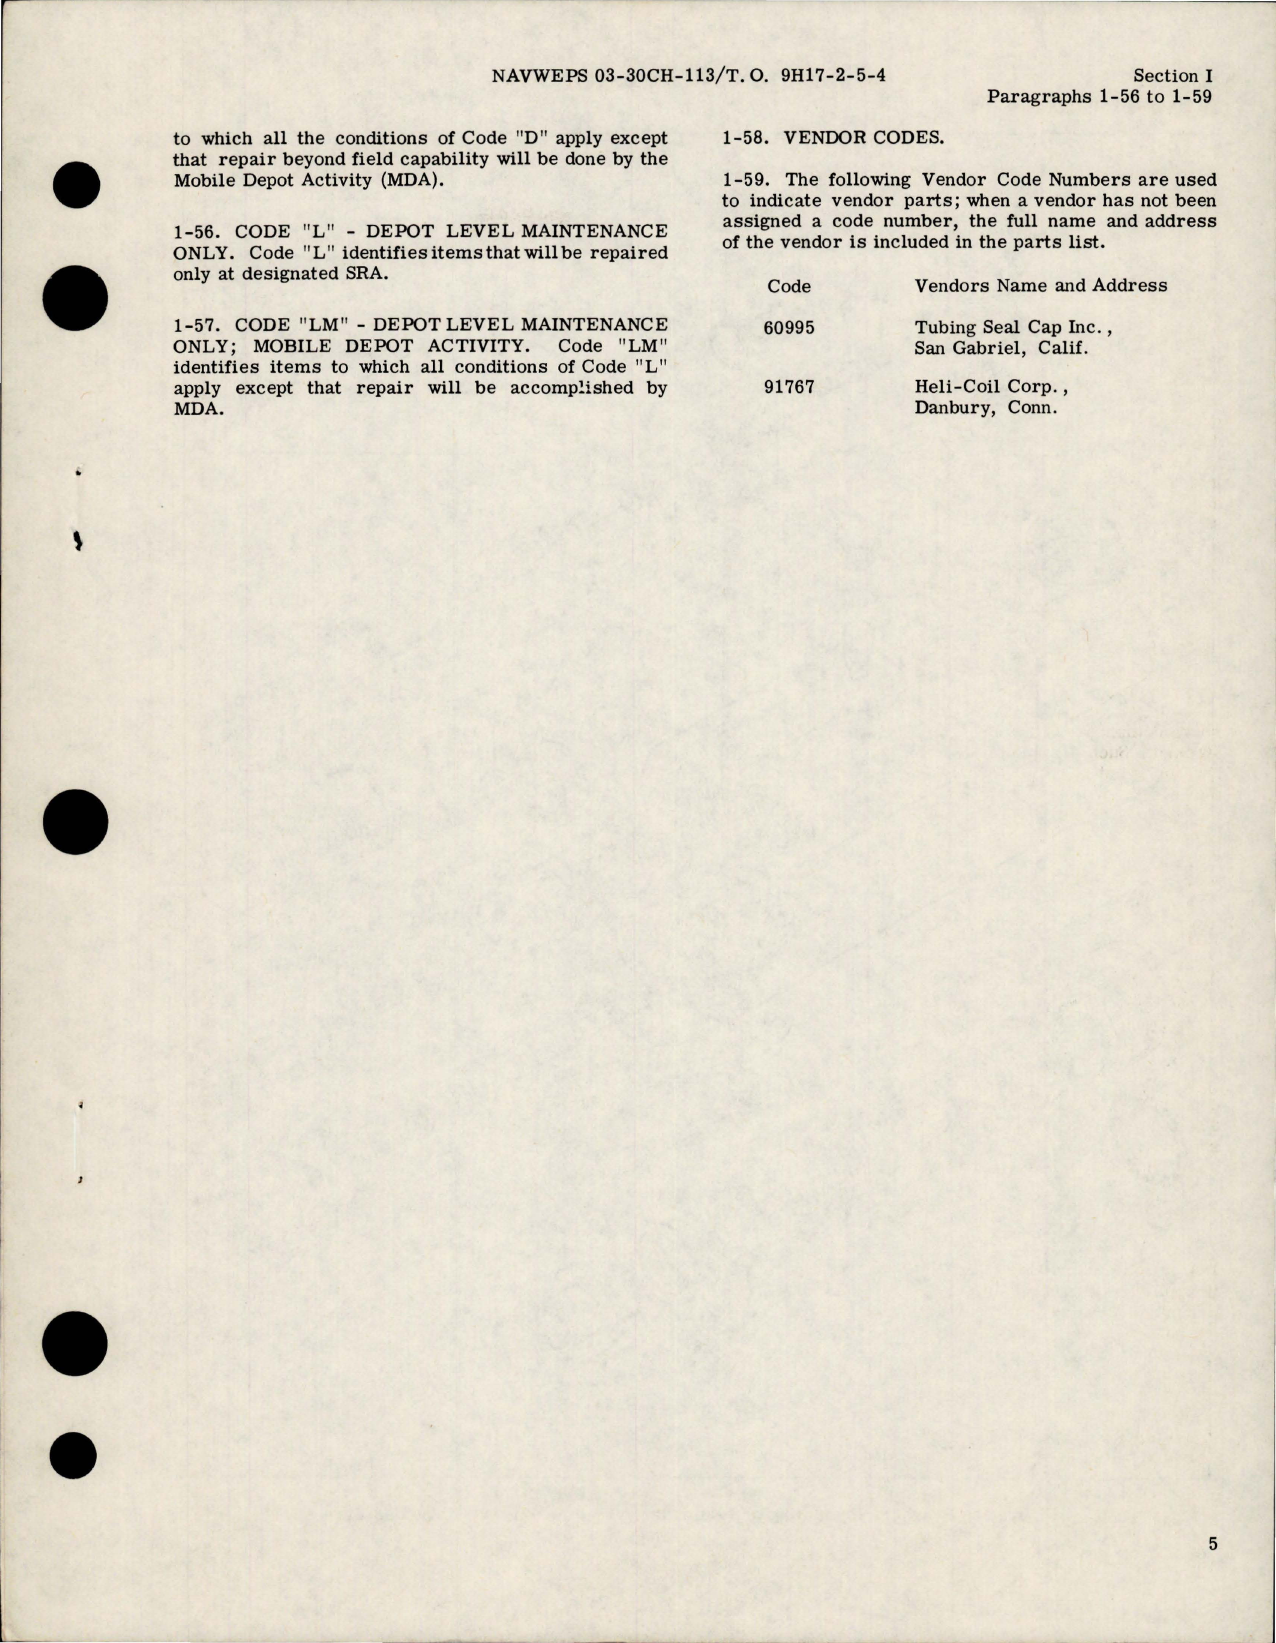 Sample page 7 from AirCorps Library document: Illustrated Parts Breakdown for Pressure Regulating and Unloading Valve Assembly - Model EA-1020-044 